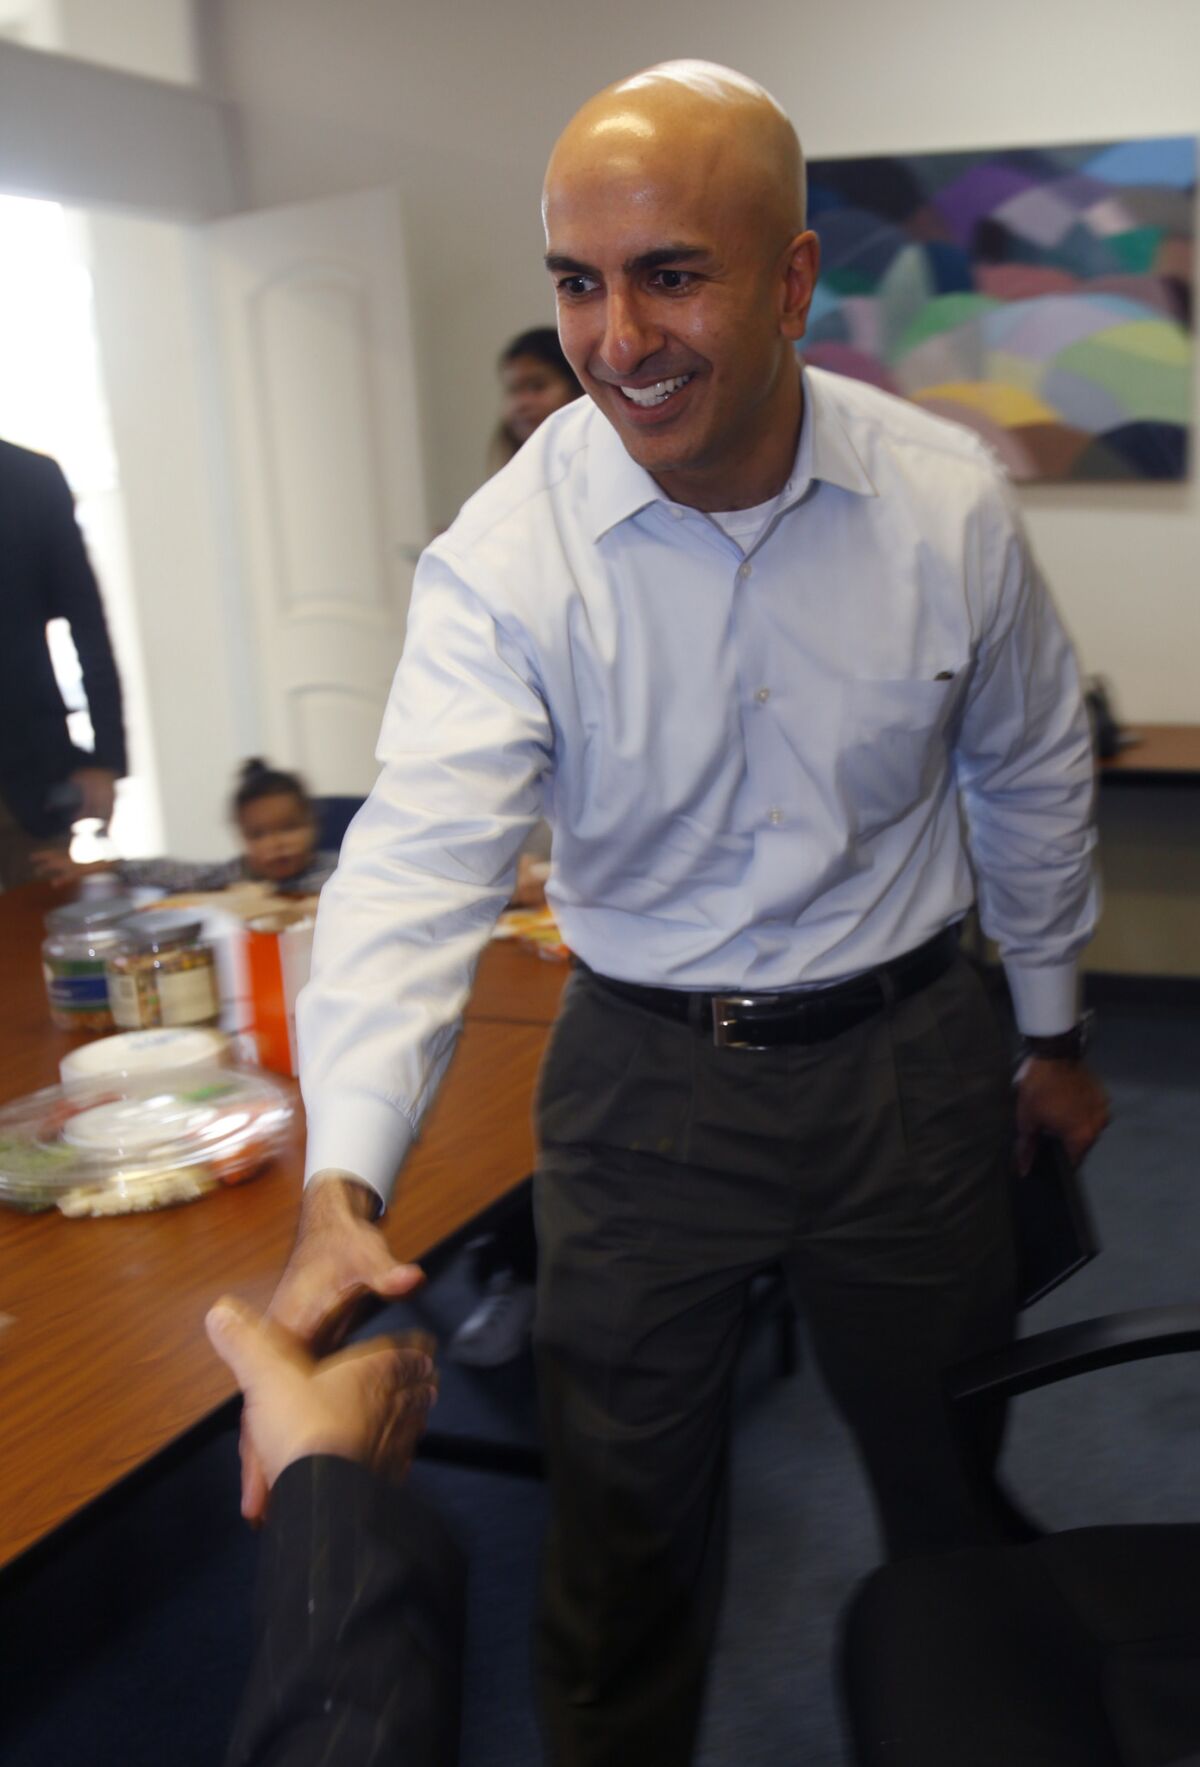 Neel Kashkari announced Tuesday he will seek the GOP nomination for governor of California. Above, Kashkari visits a charitable foundation in Stanton, Calif., last fall.